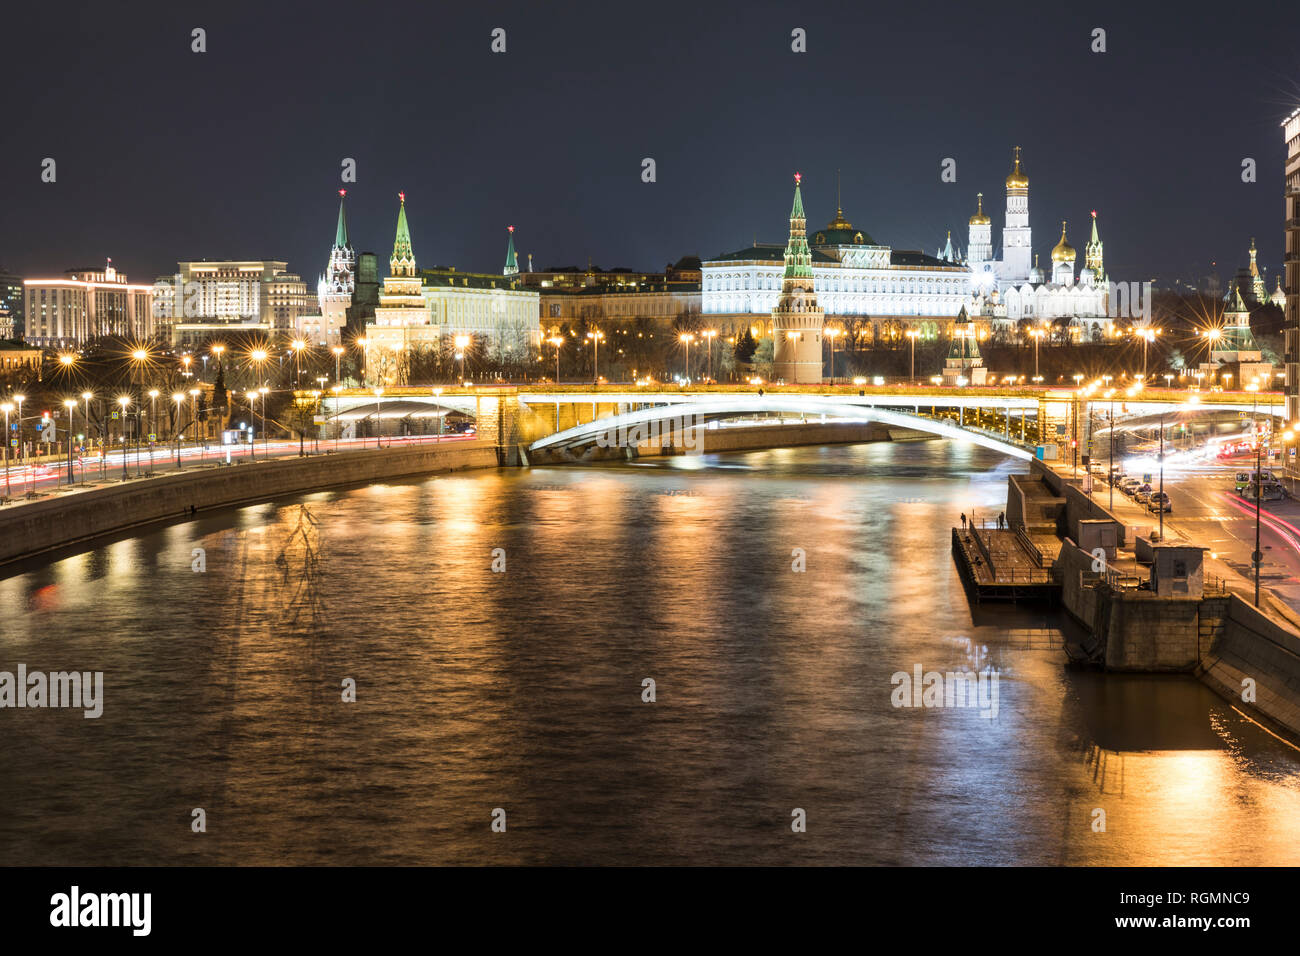 Russia, Moscow, Panoramic view of Moskva river and Kremlin at night Stock Photo